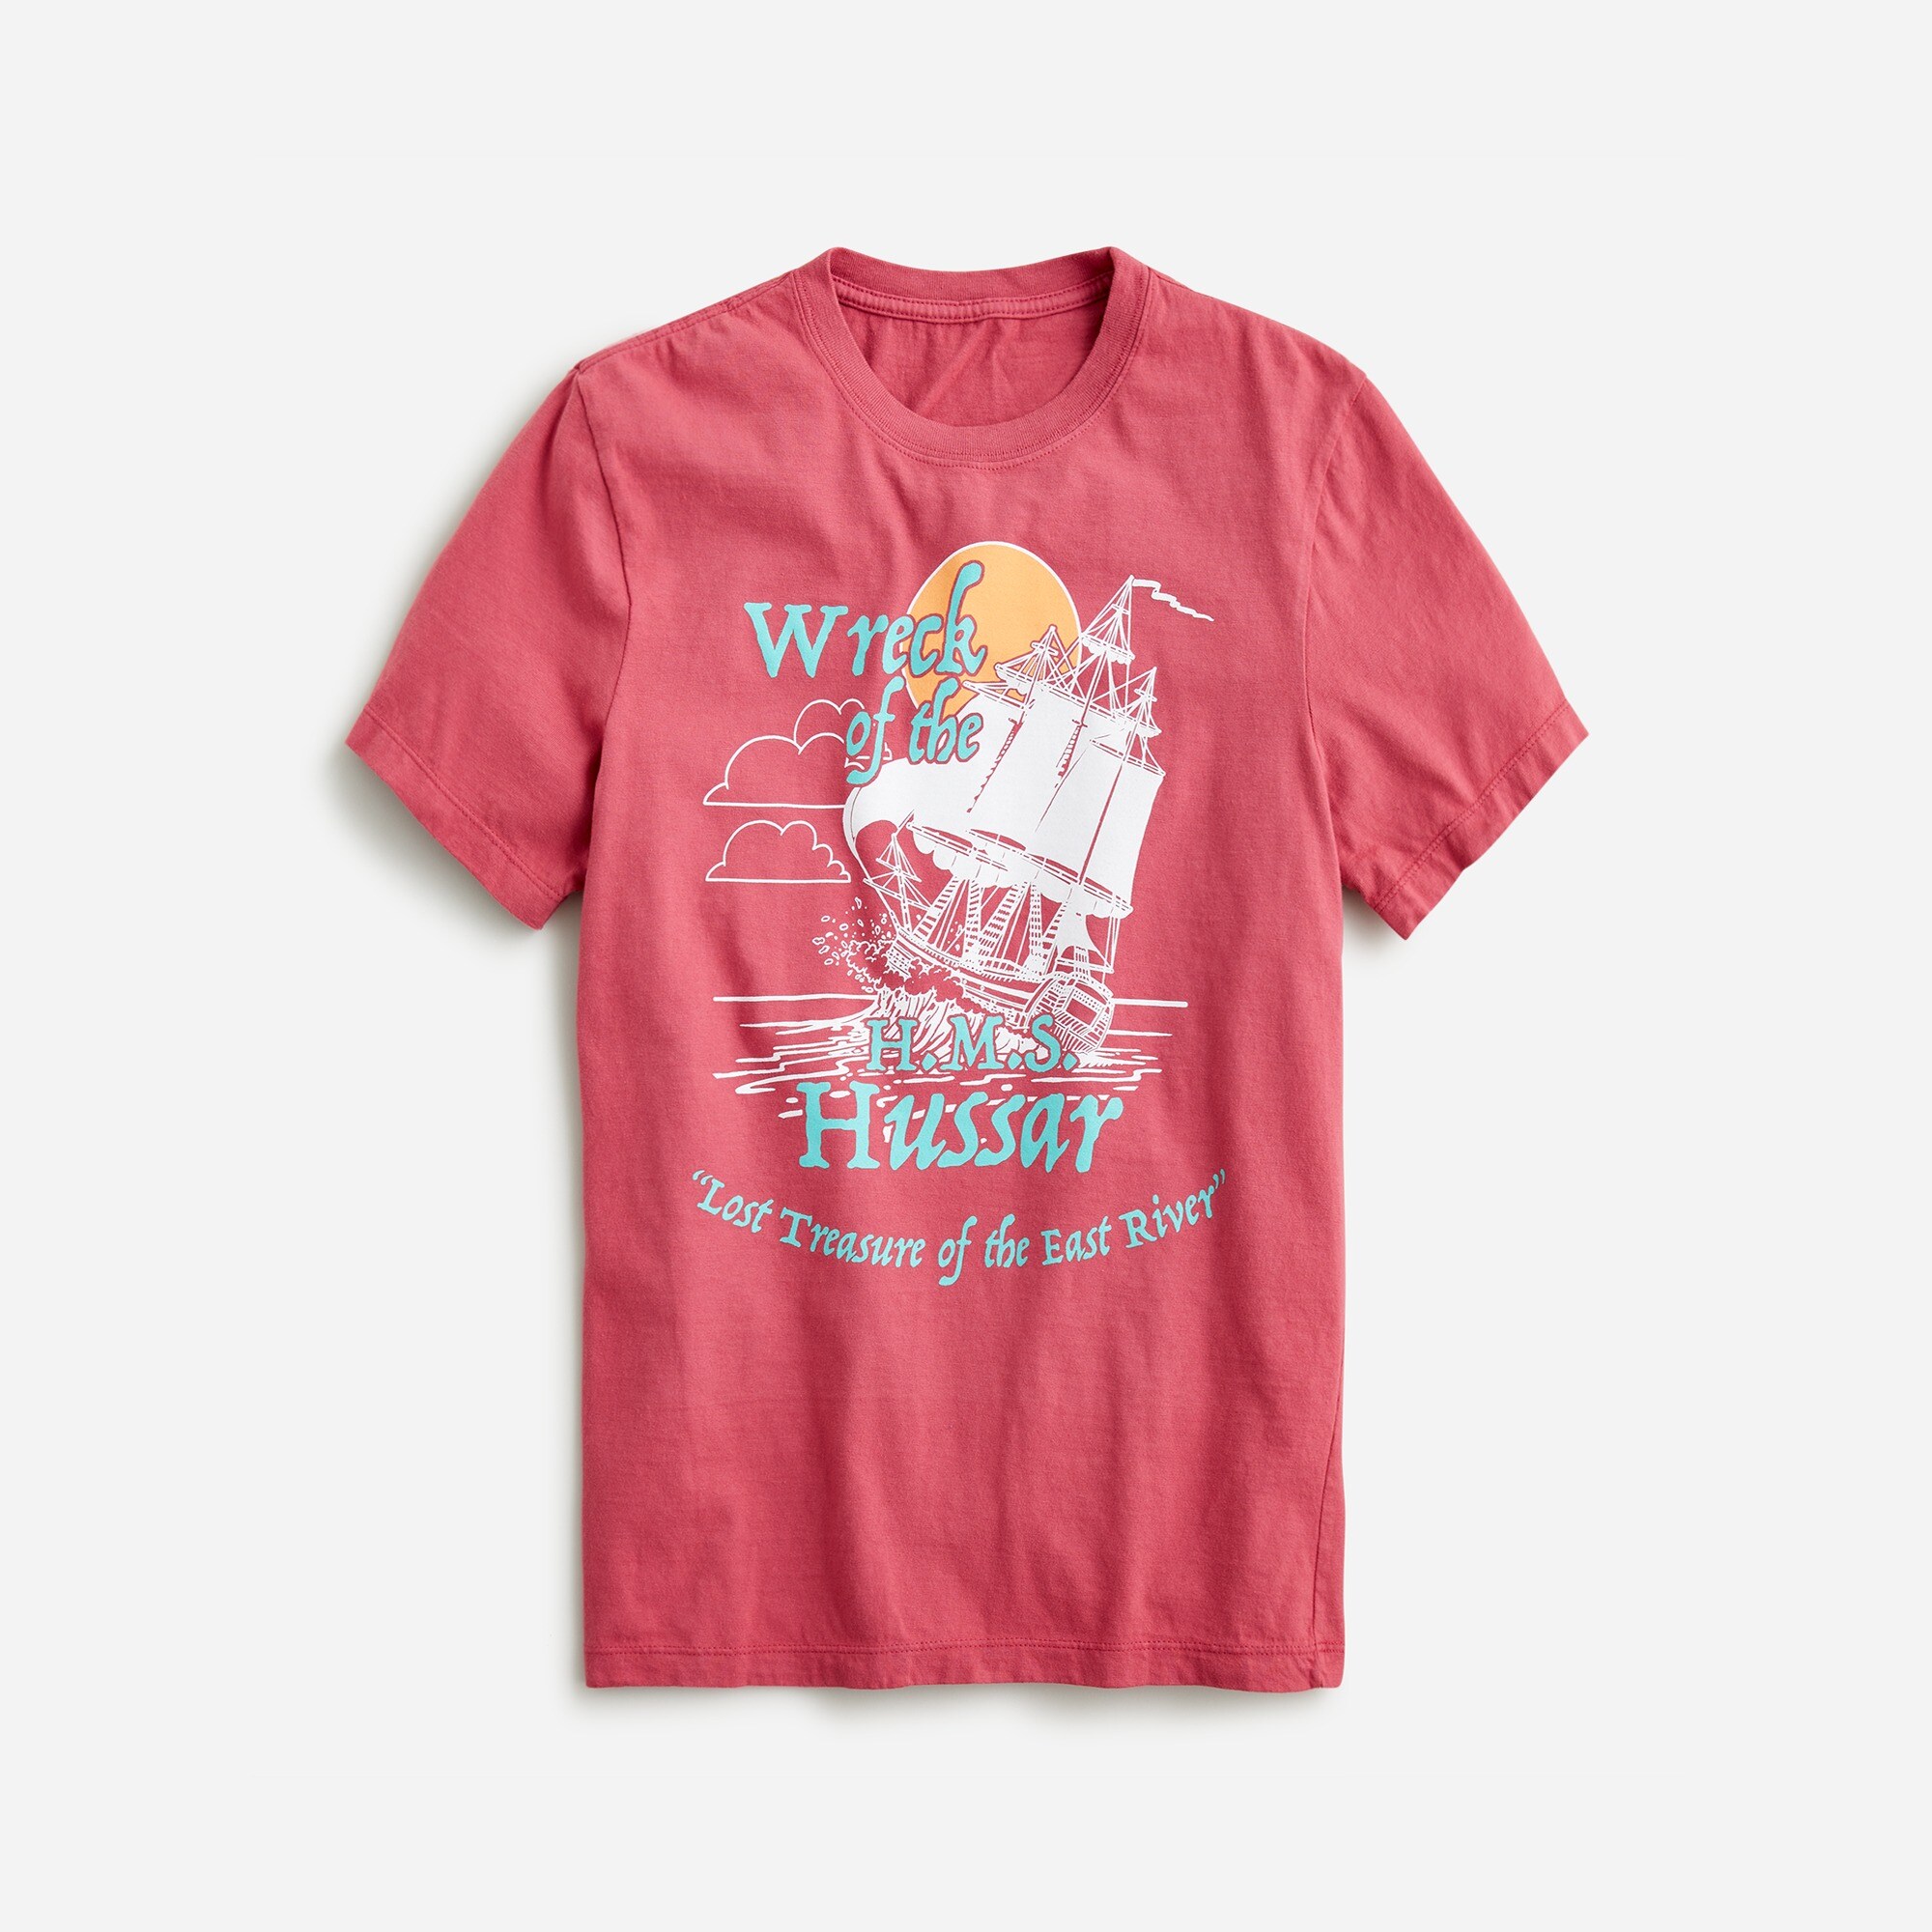  Made-in-the-USA Wreck of the Hussar graphic T-shirt